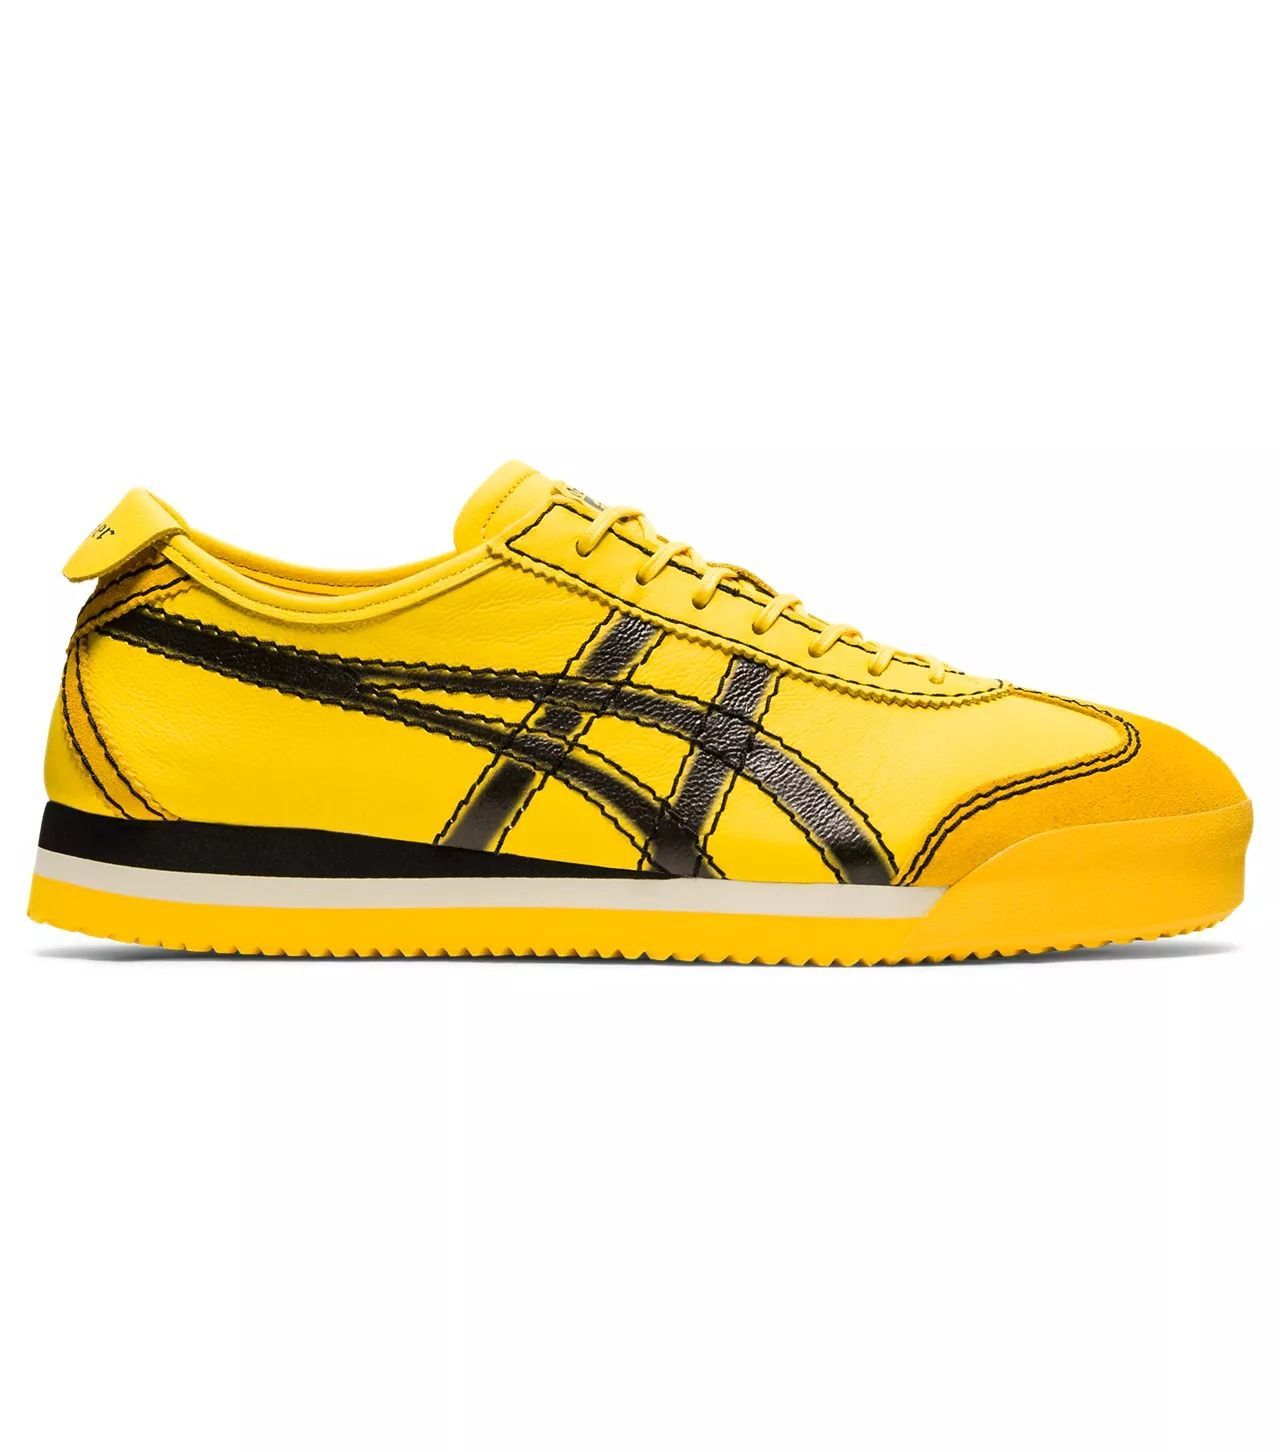 Onitsuka Tiger's Mexico 66s are the trainers of the moment